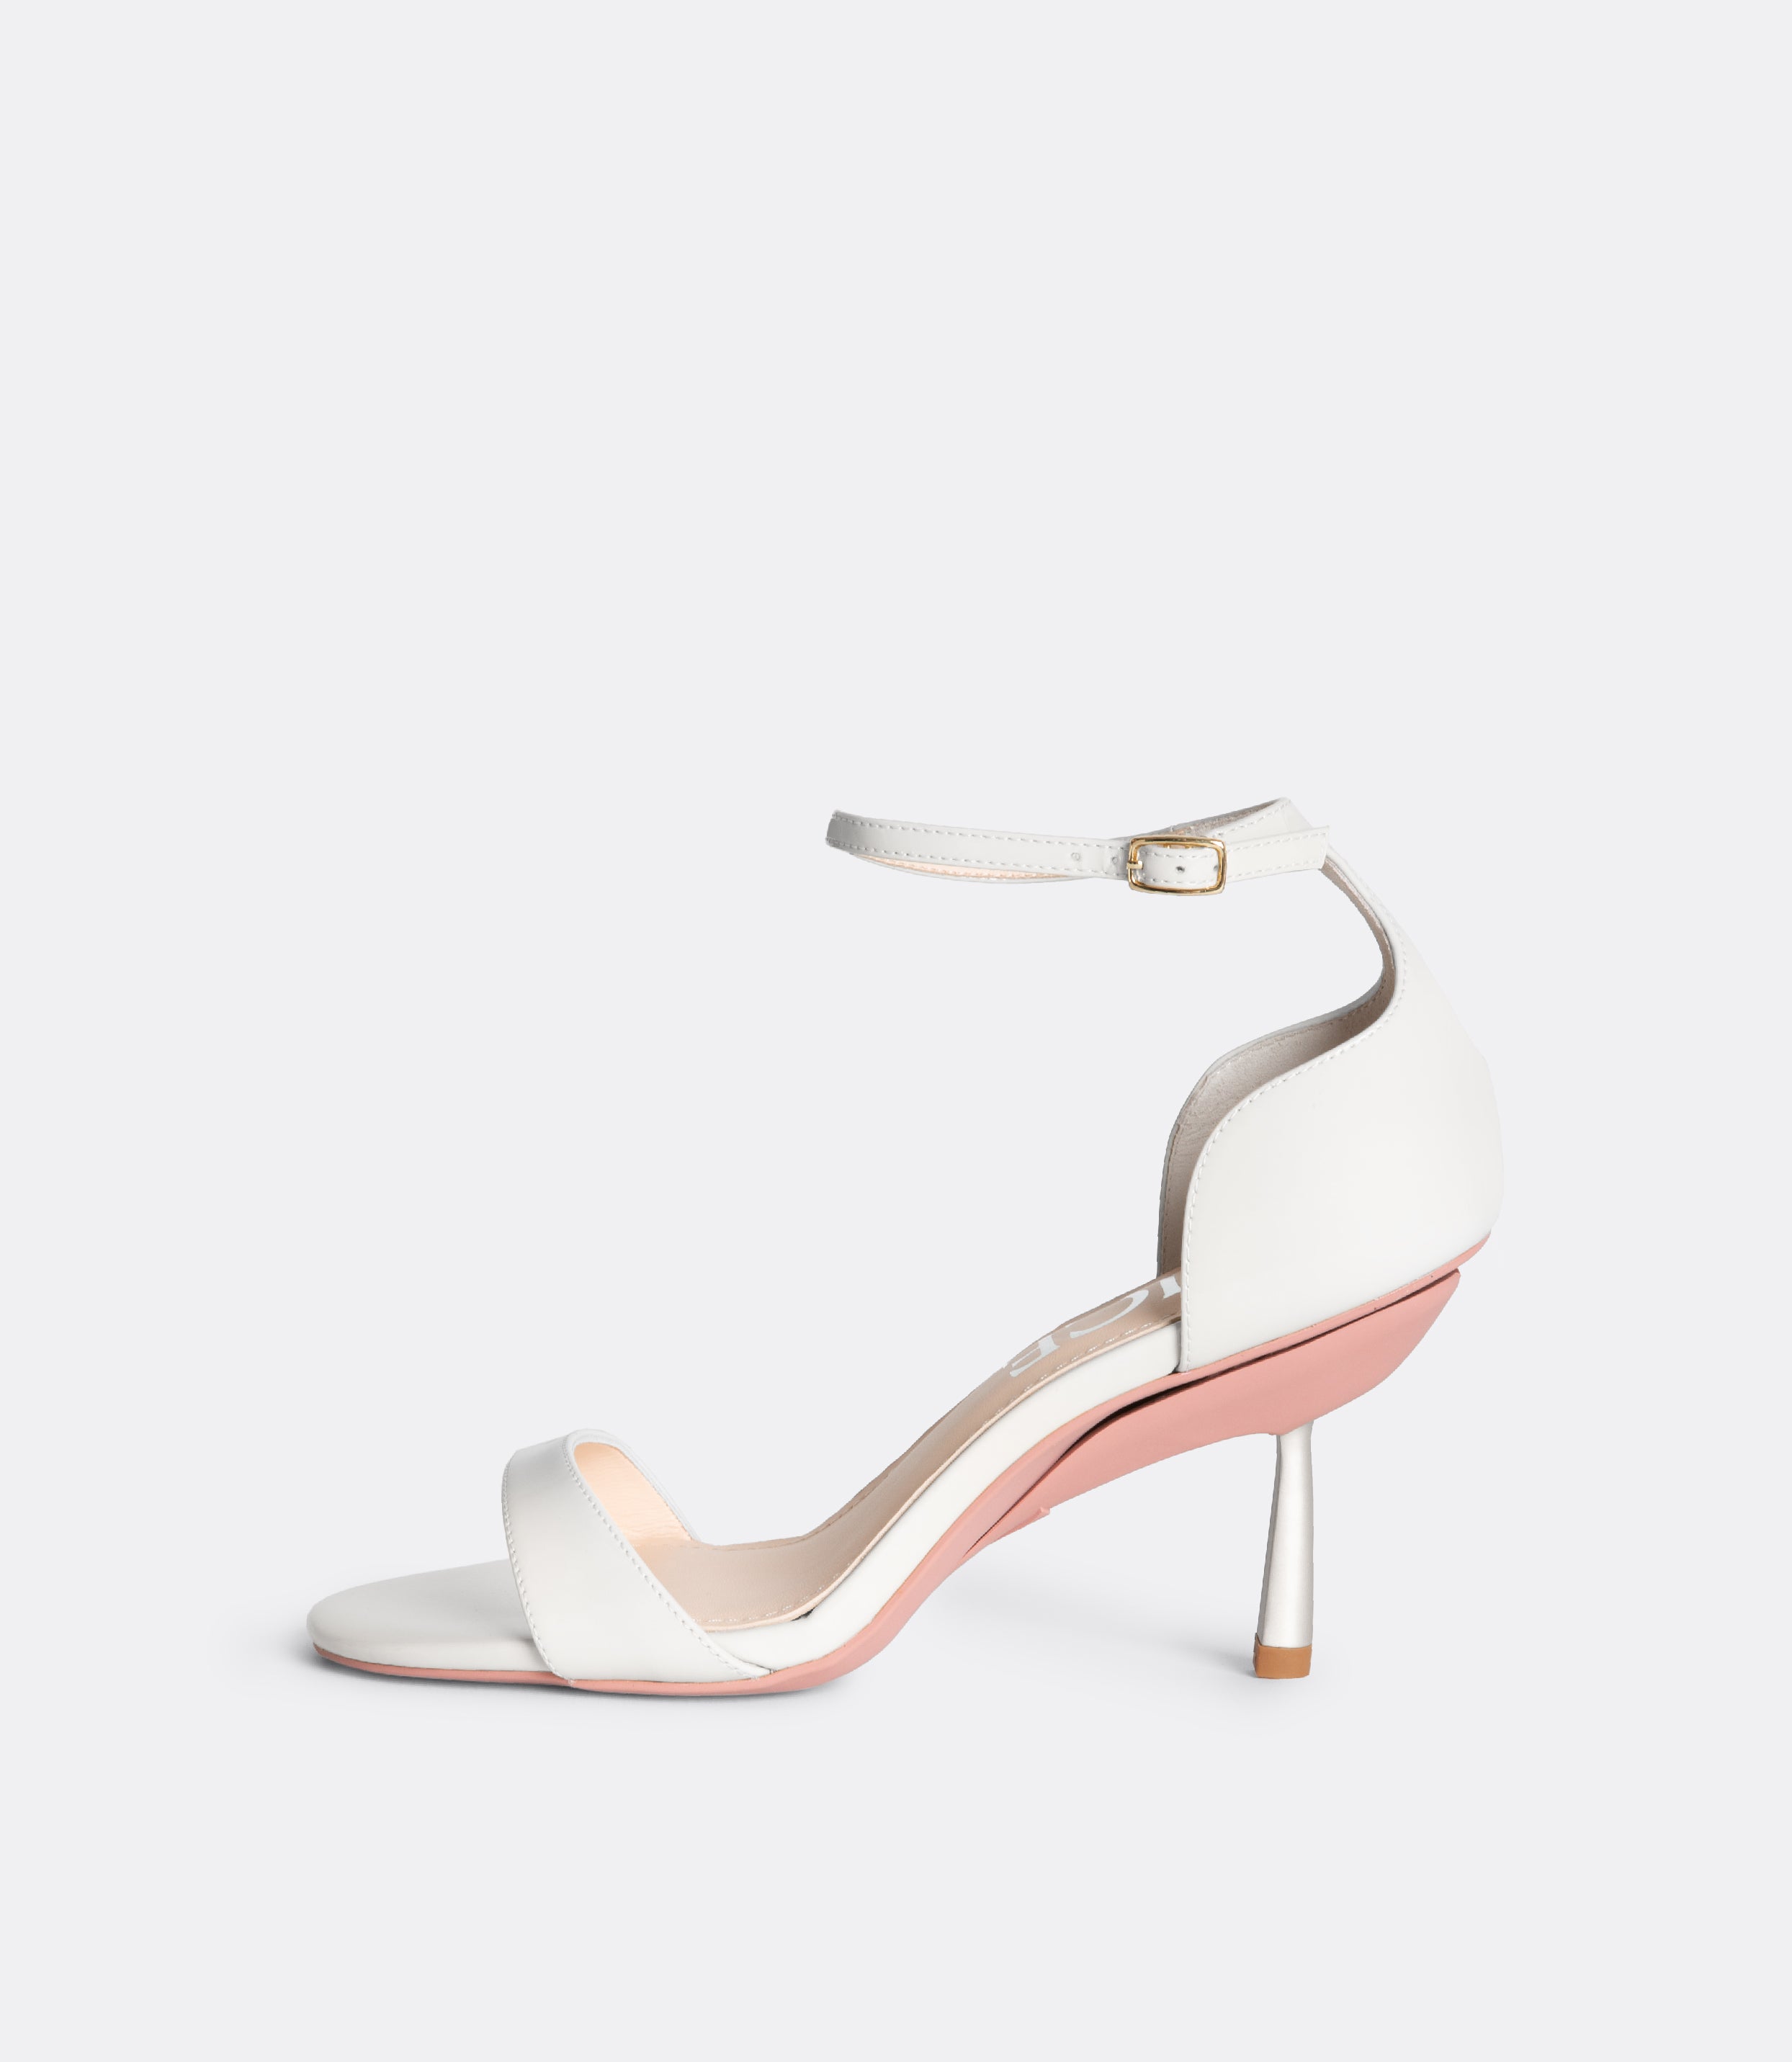 Side view of the white editor sandals.